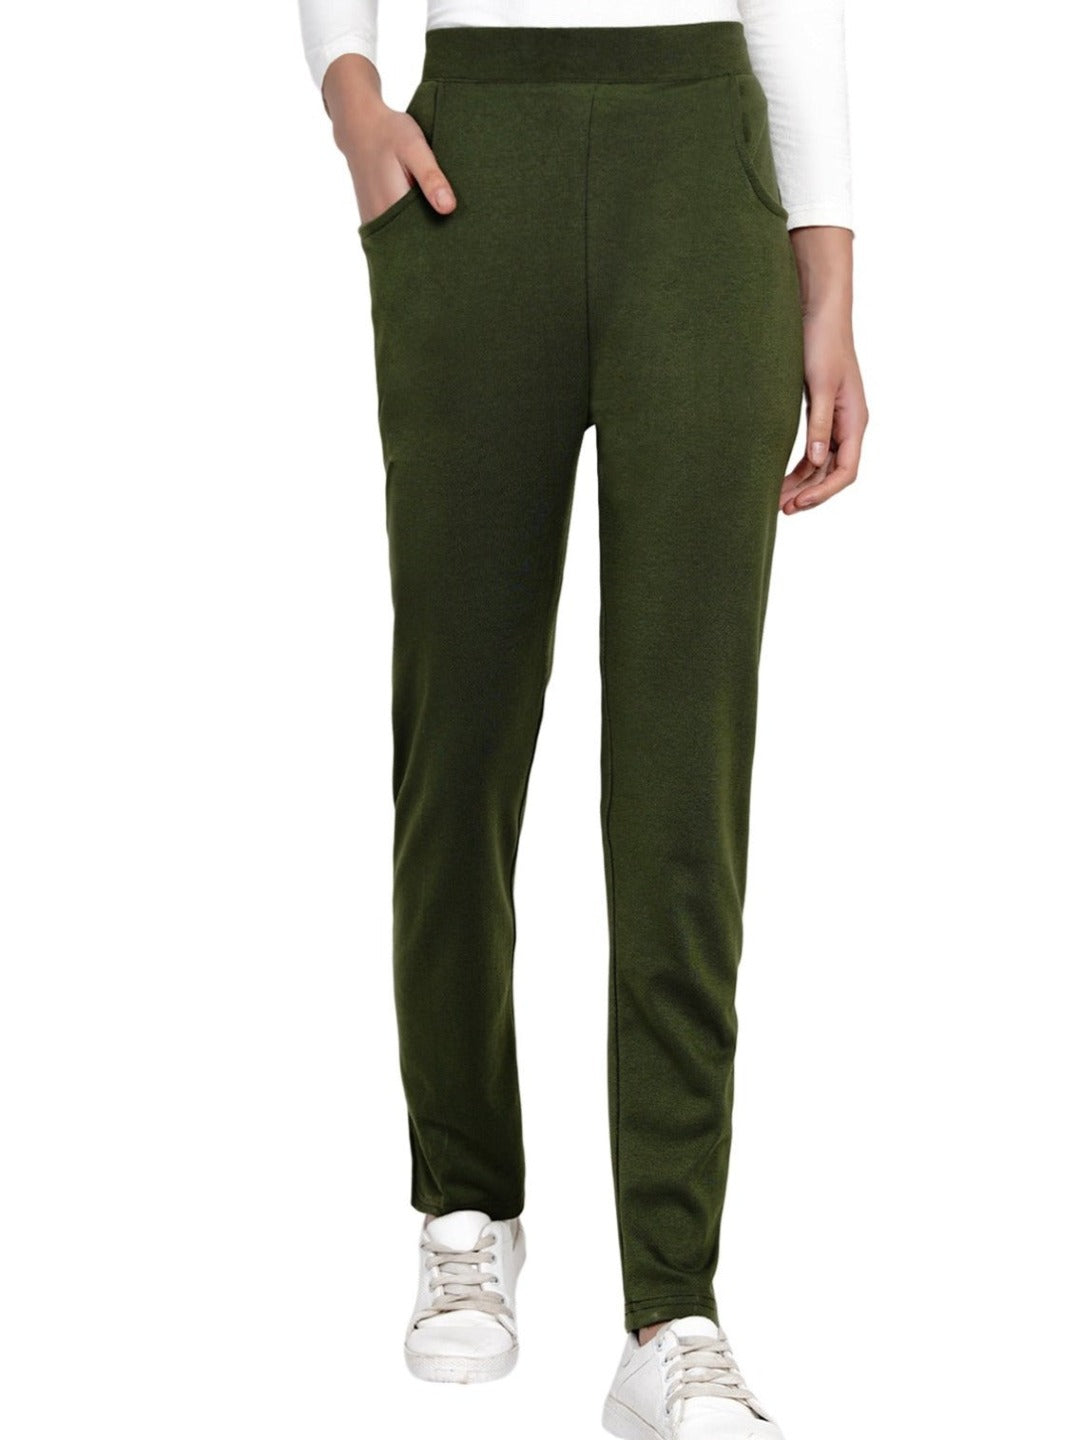 Olive Green Solid Track Pants-Track Pants-Fabnest